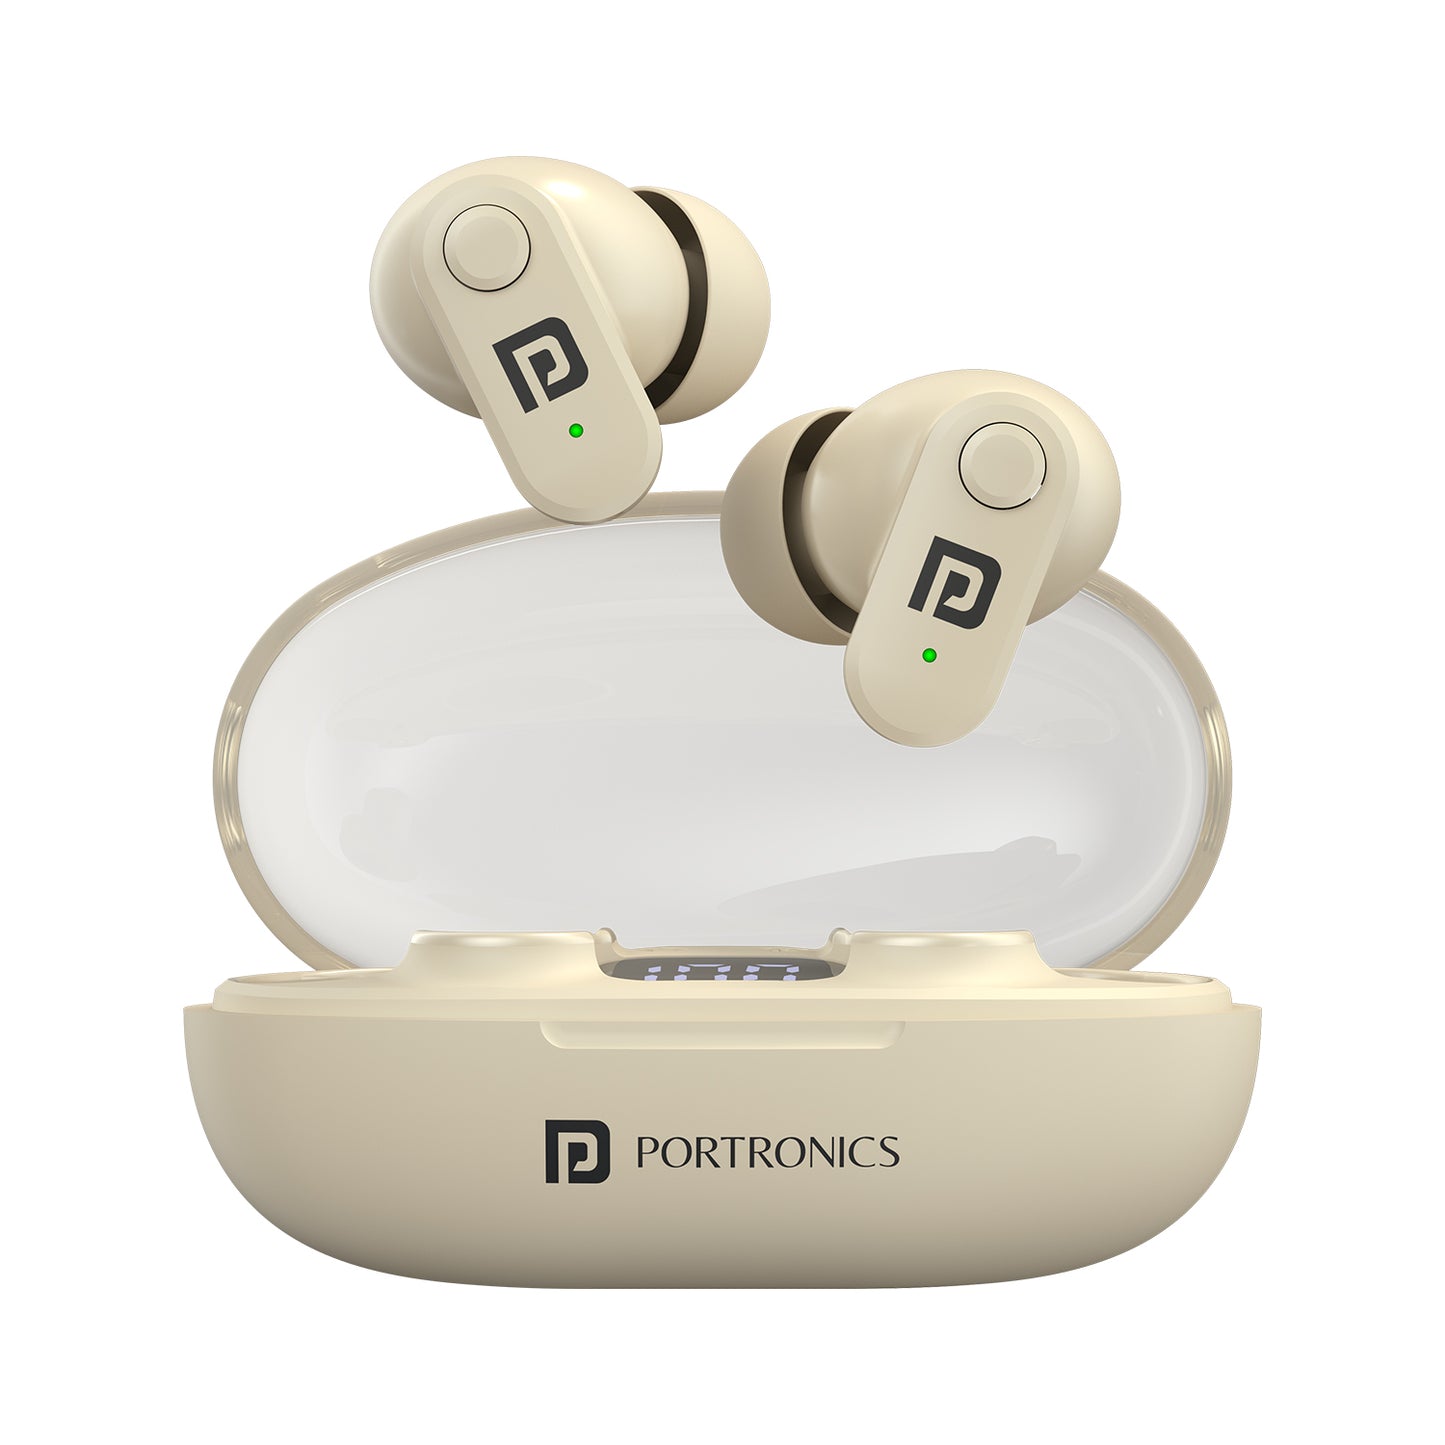 Portronics Harmonics Twins s16 Smart wireless TWS earbuds| earbuds with noise cancelling online| Bluetooth earbuds with mic